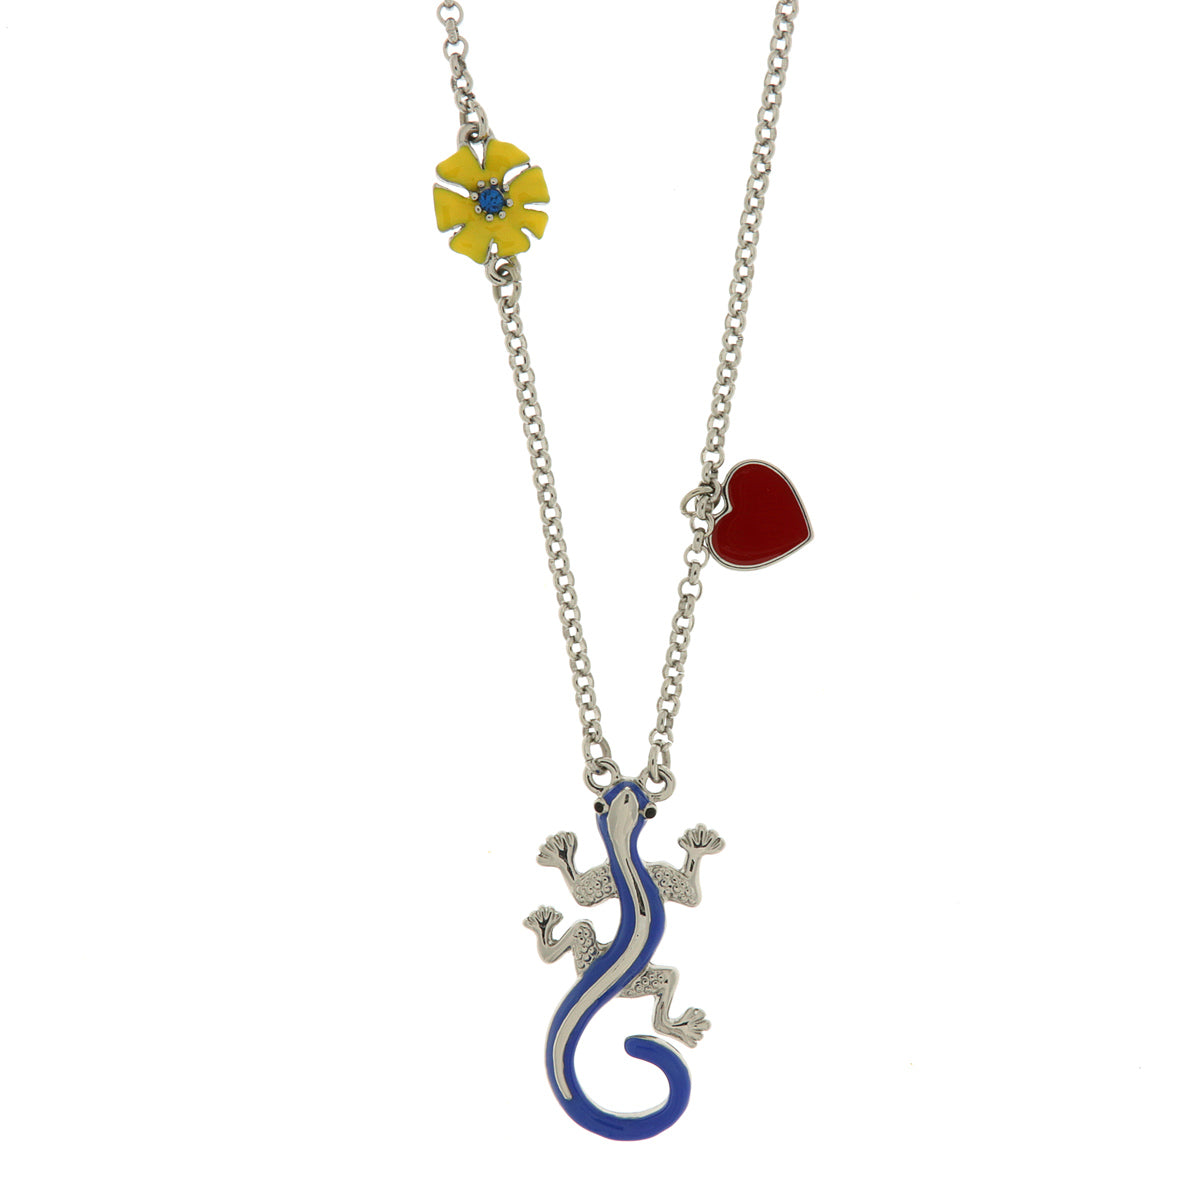 Metal necklace with central geco, yellow flower and red heart